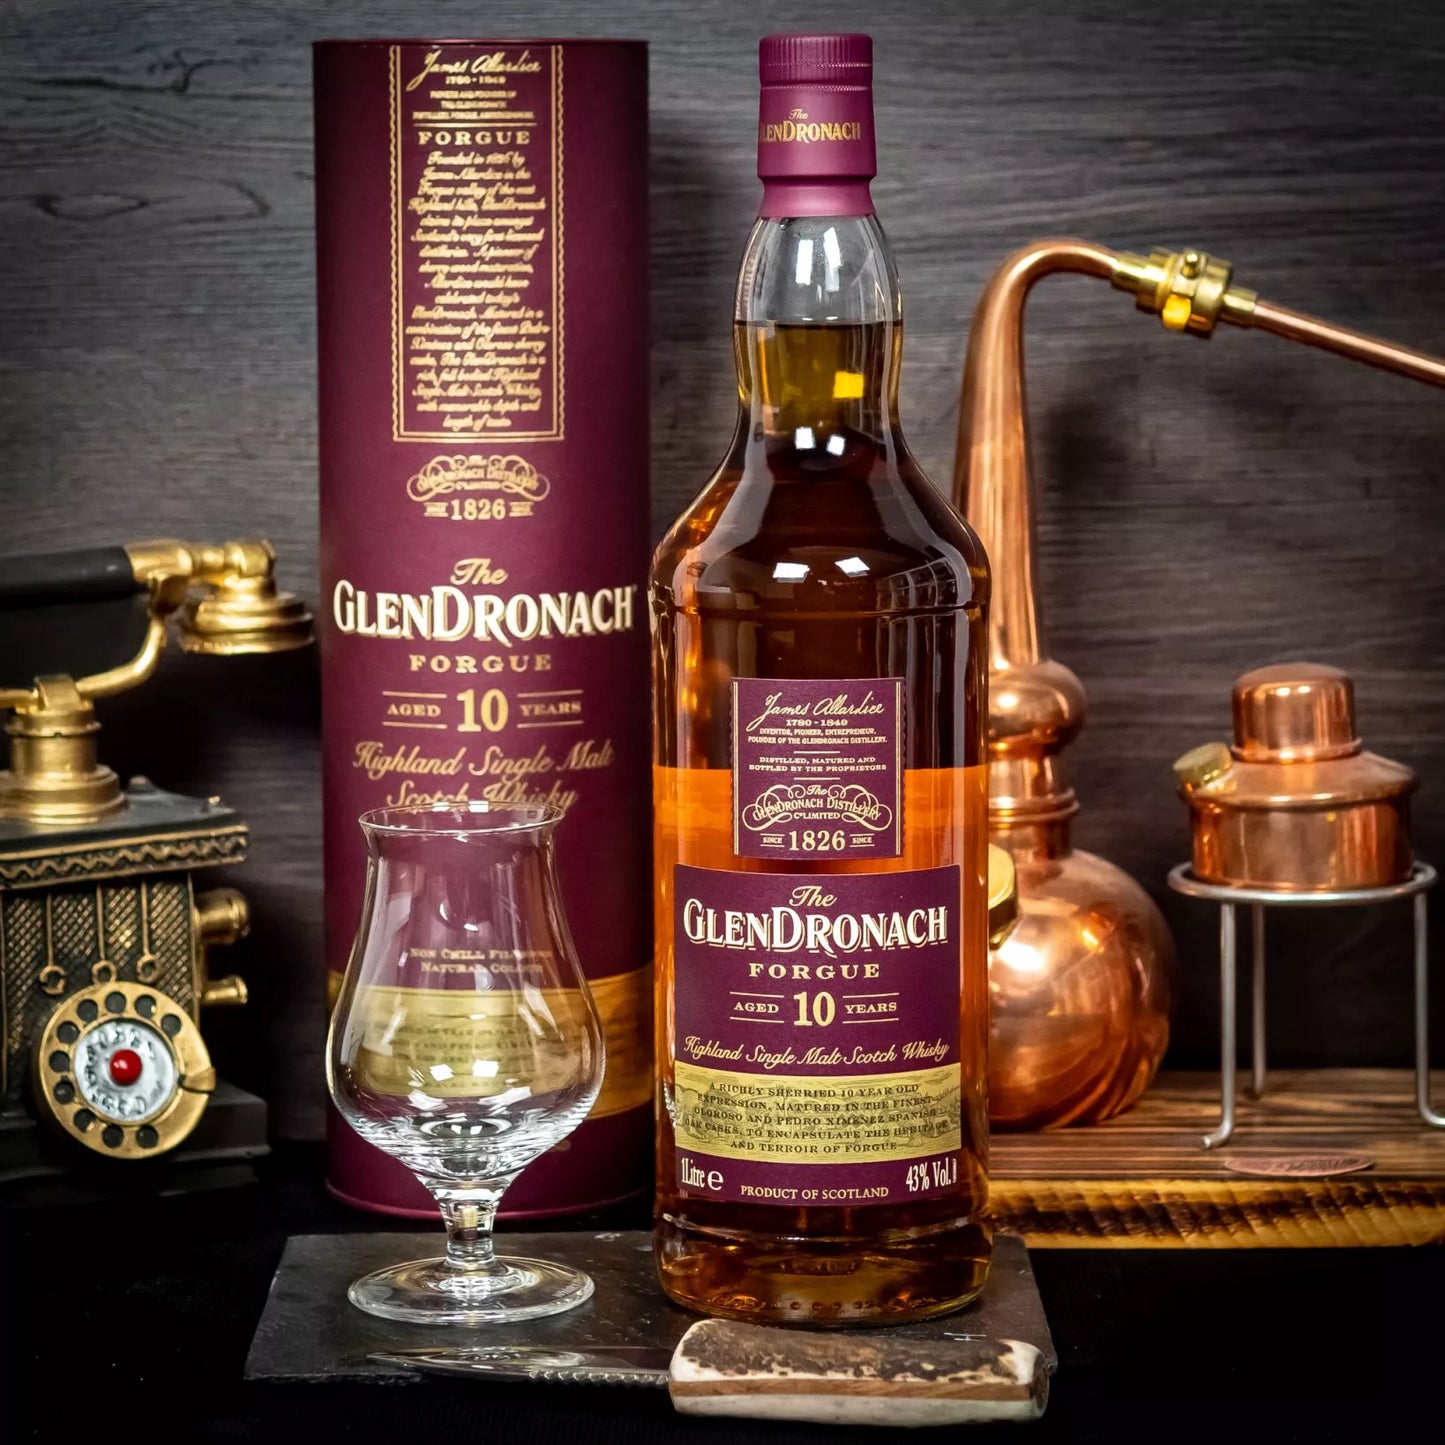 The Glendronach 10 Year Old-Forgue (100cl; 43%)